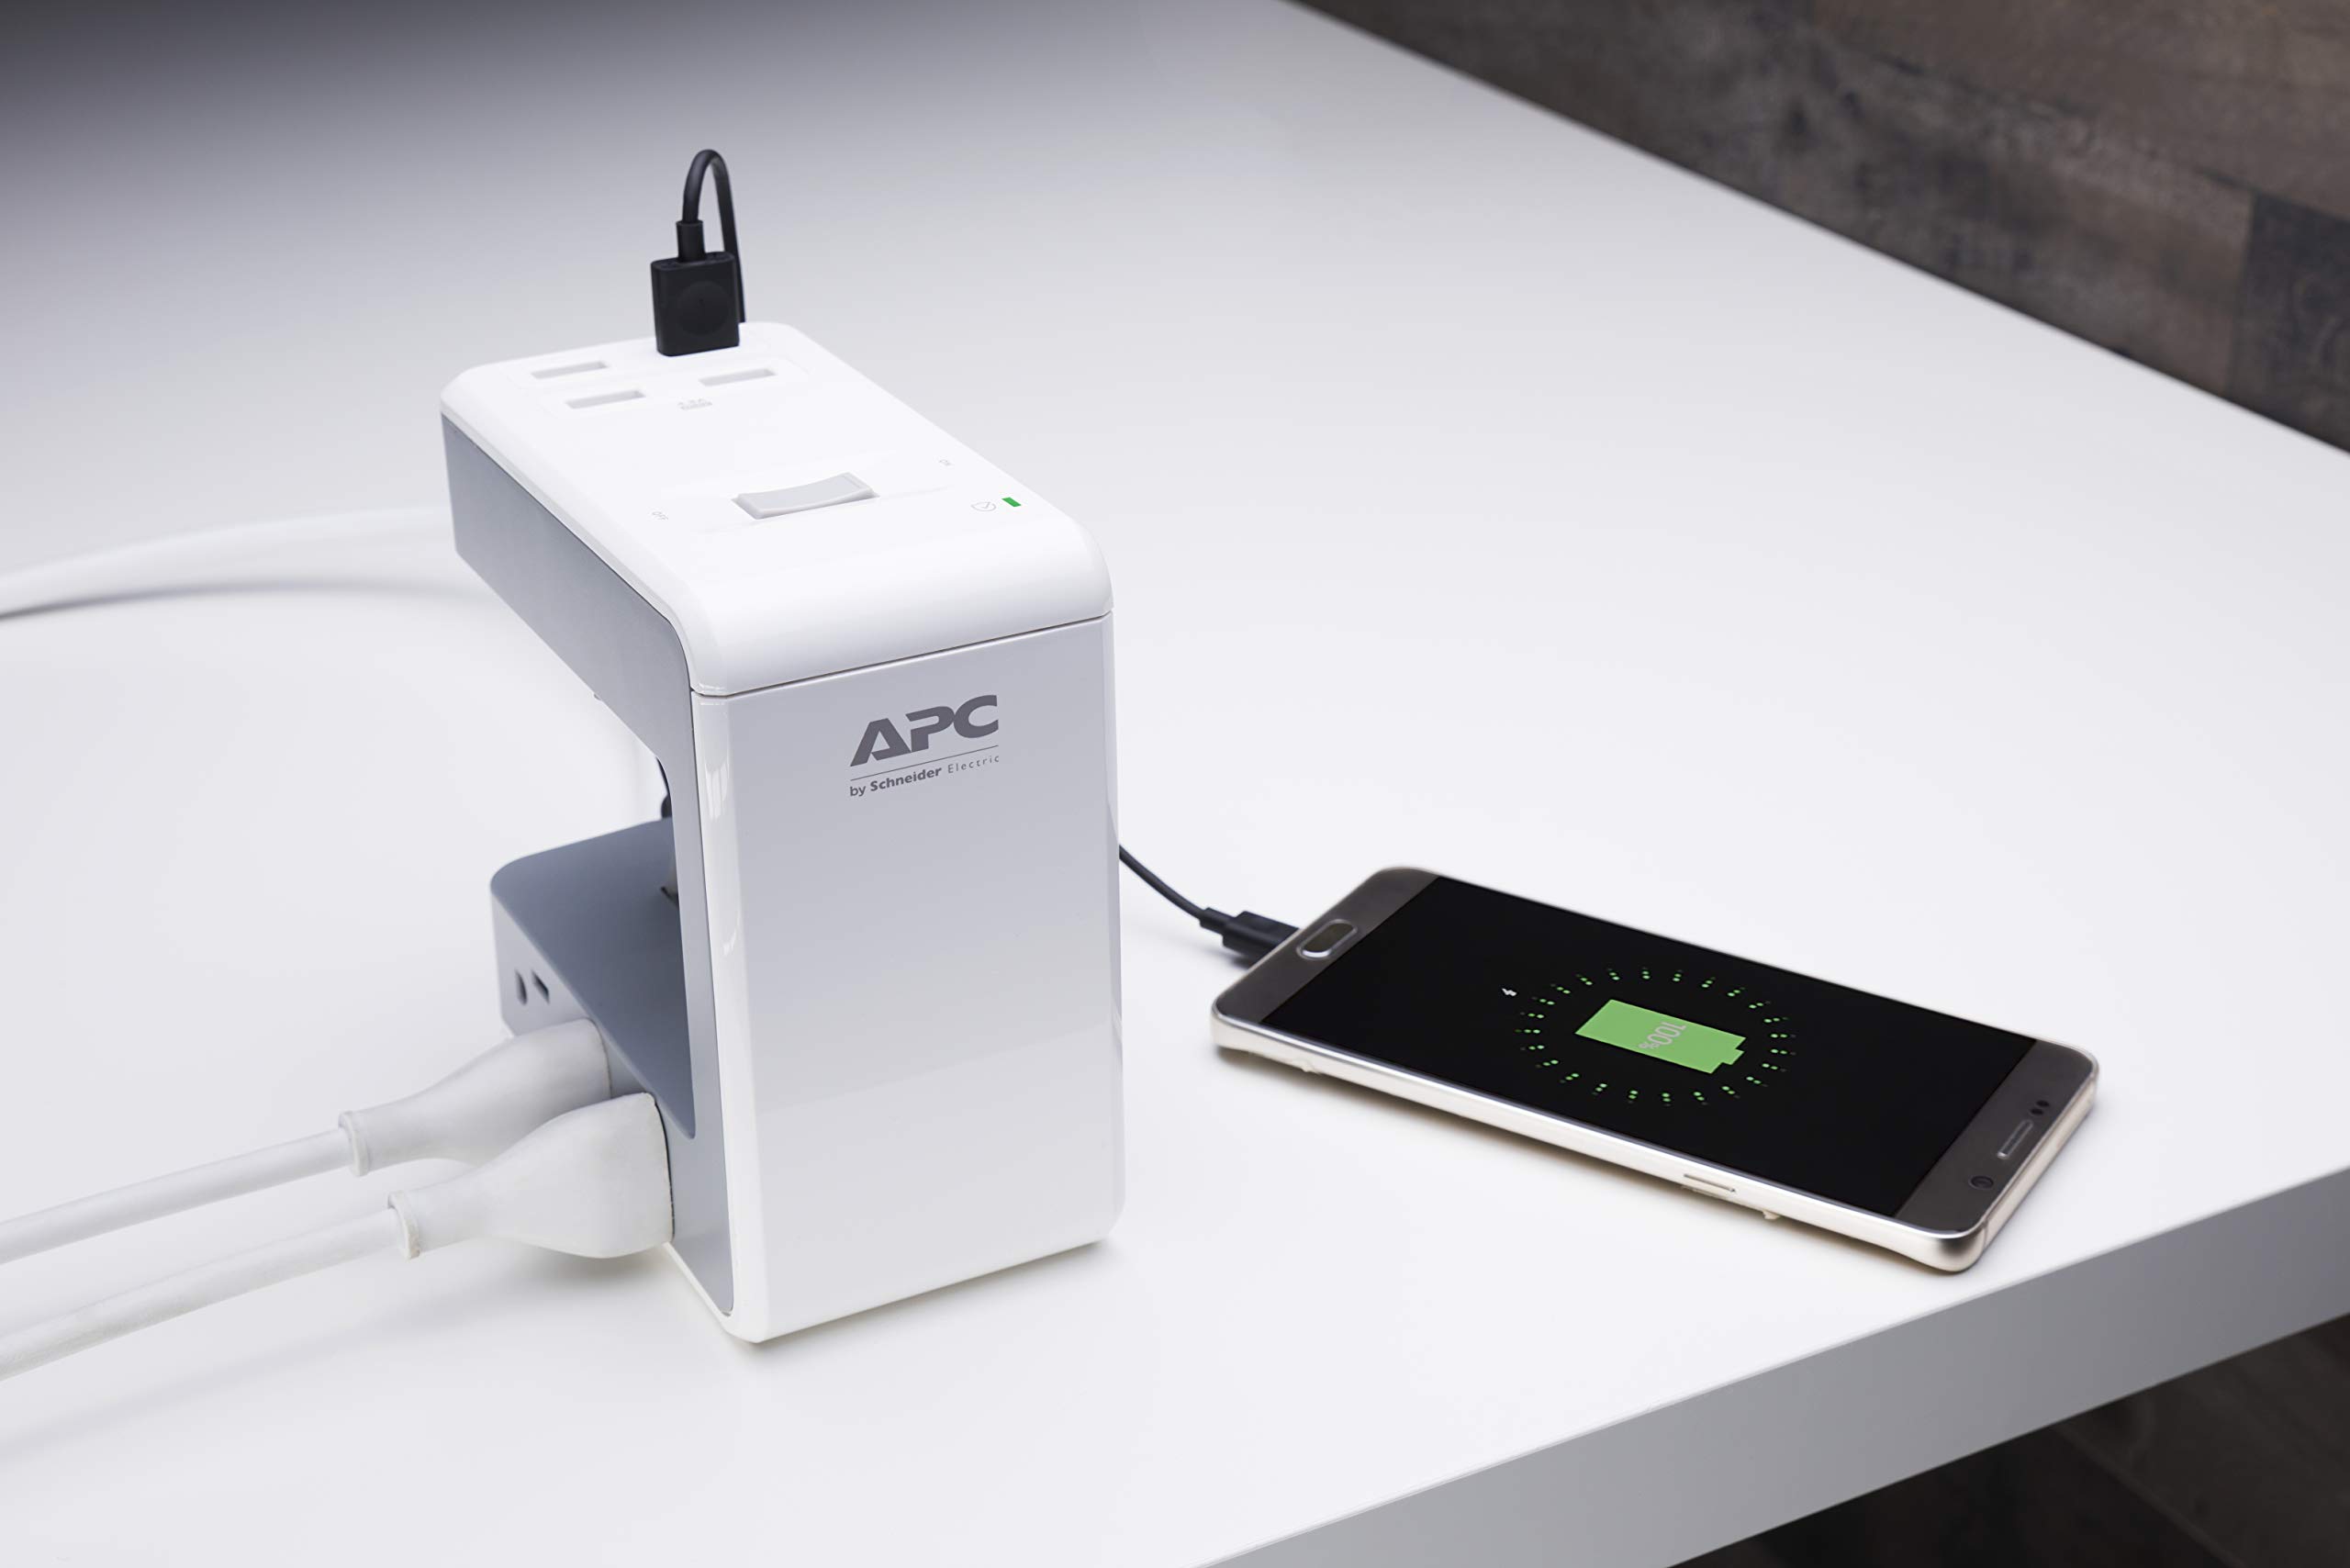 APC Desk Mount Power Station PE6U4W, U-Shaped Surge Protector with USB Ports (4), Desk Clamp, 6 Outlet, 1080 Joules